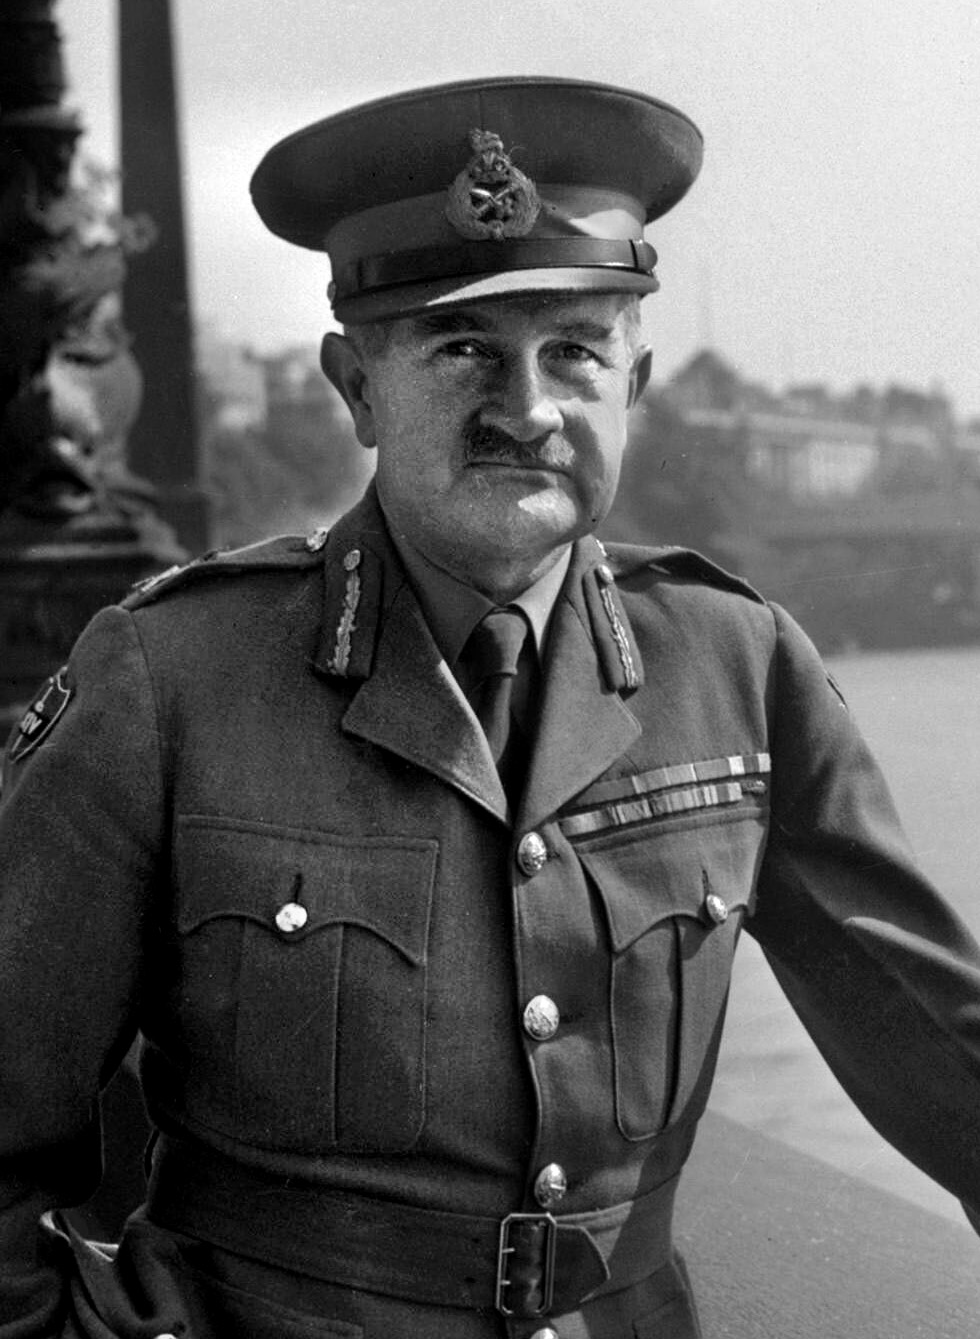 General William Slim, architect of the 14th Army victory in Burma, inflicted the greatest land defeat on the Japanese in all of World War II. Nevertheless, Slim, pictured in 1945, was one of the unsung heroes of the war, his skill and command presence largely overshadowed by others in the upper echelons of the British Army.